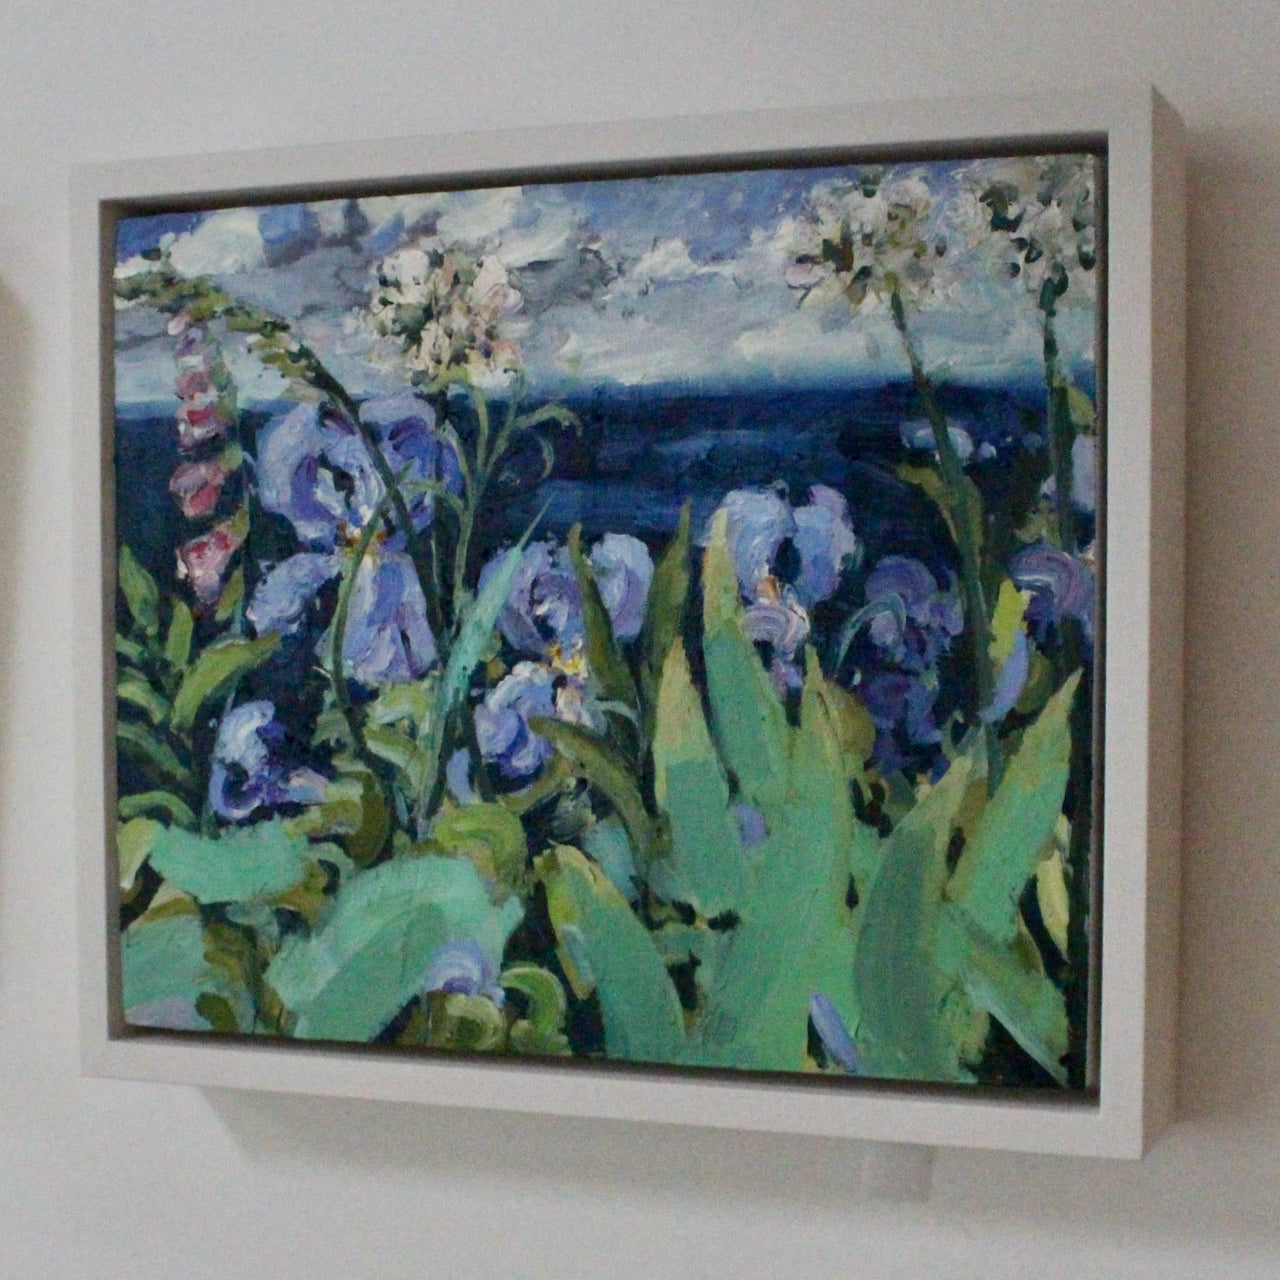 a framed Jill Hudson oil painting of purple iris flowers and pink lupins in a garden overlooking a blue sea.